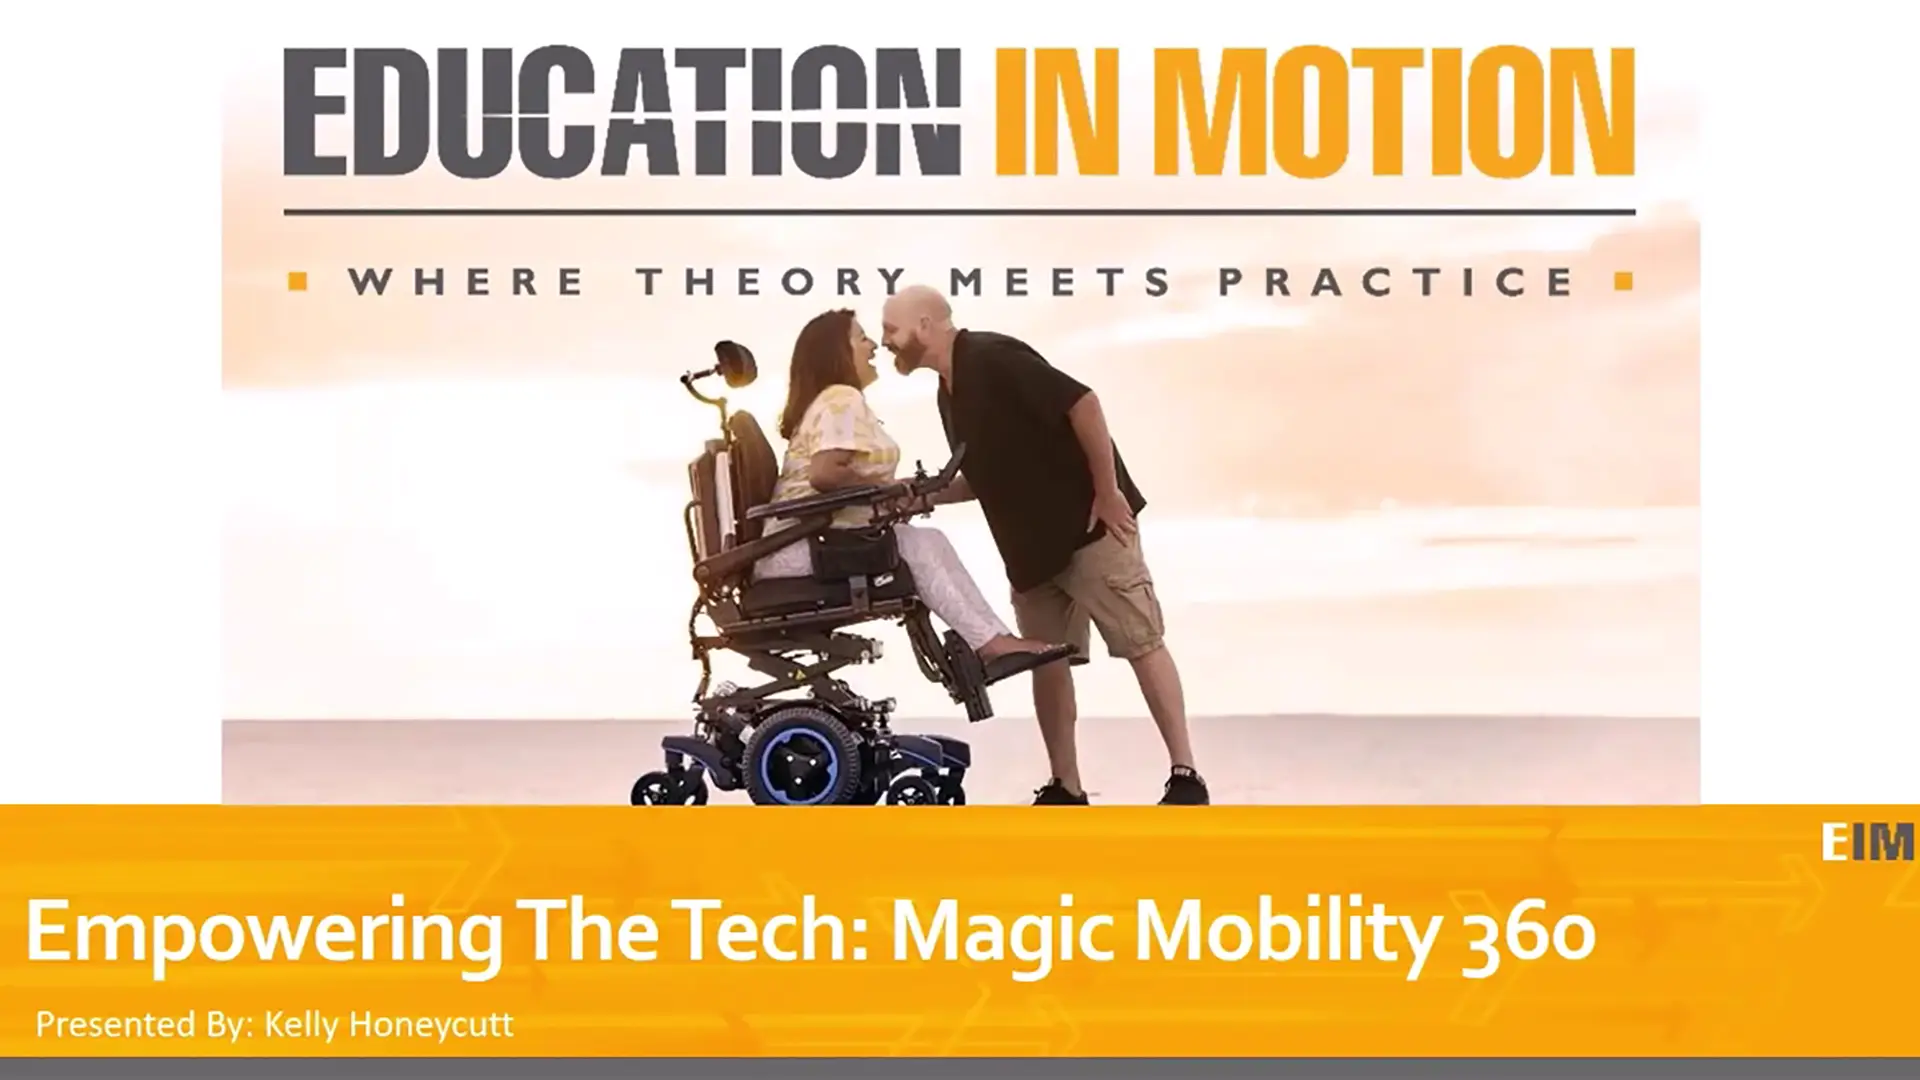 Empowering Technicians: Magic Mobility 360